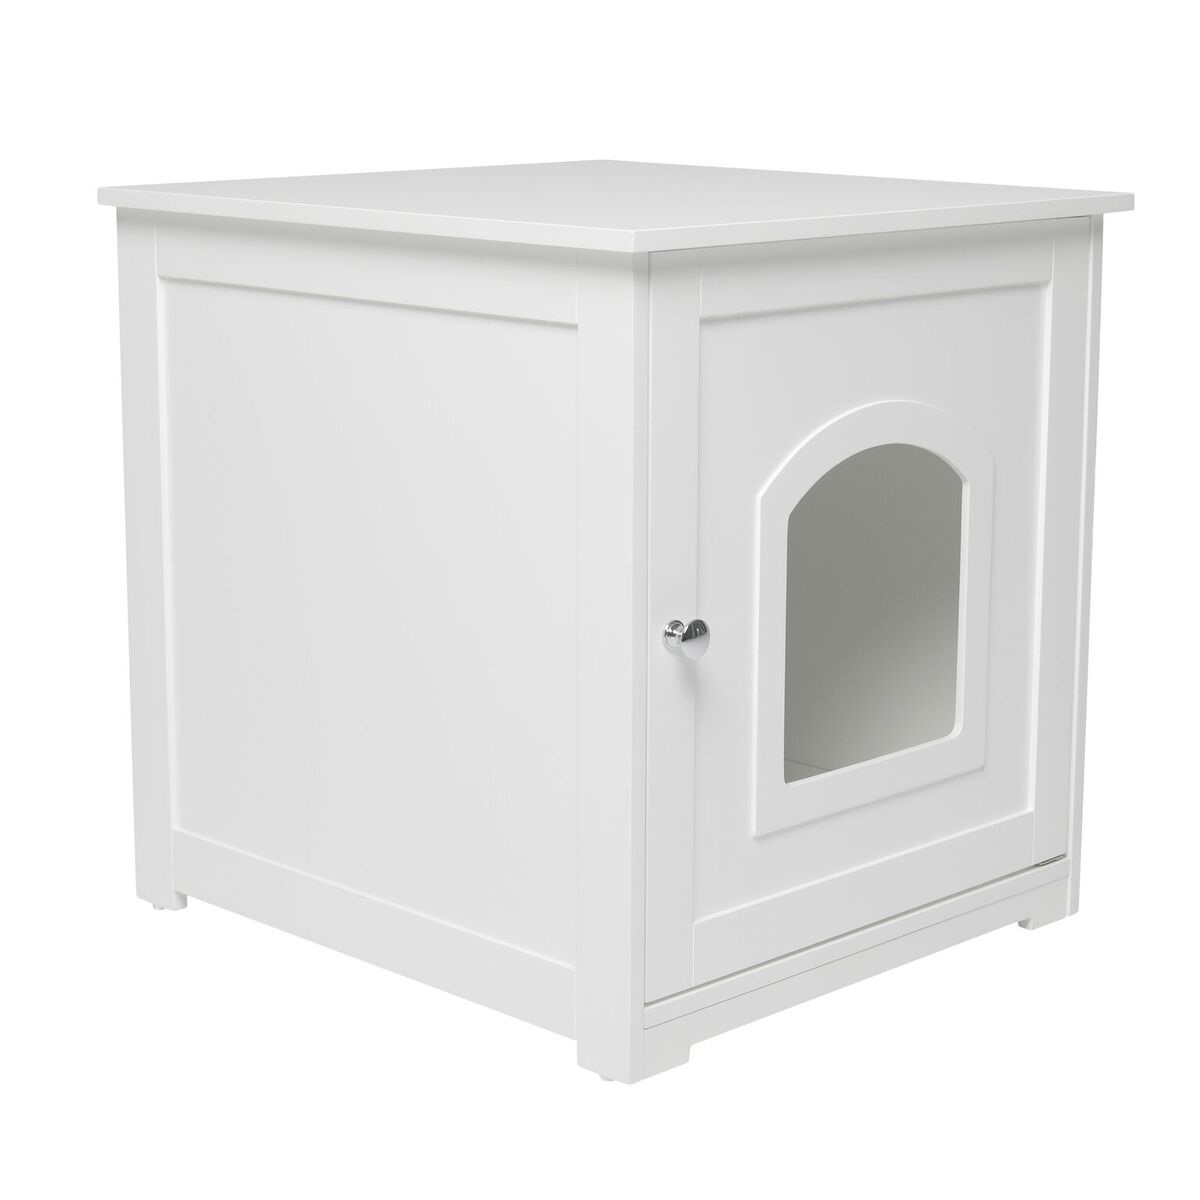 Picture of Zoovilla PTH0831720110 Kitty Litter Loo, White